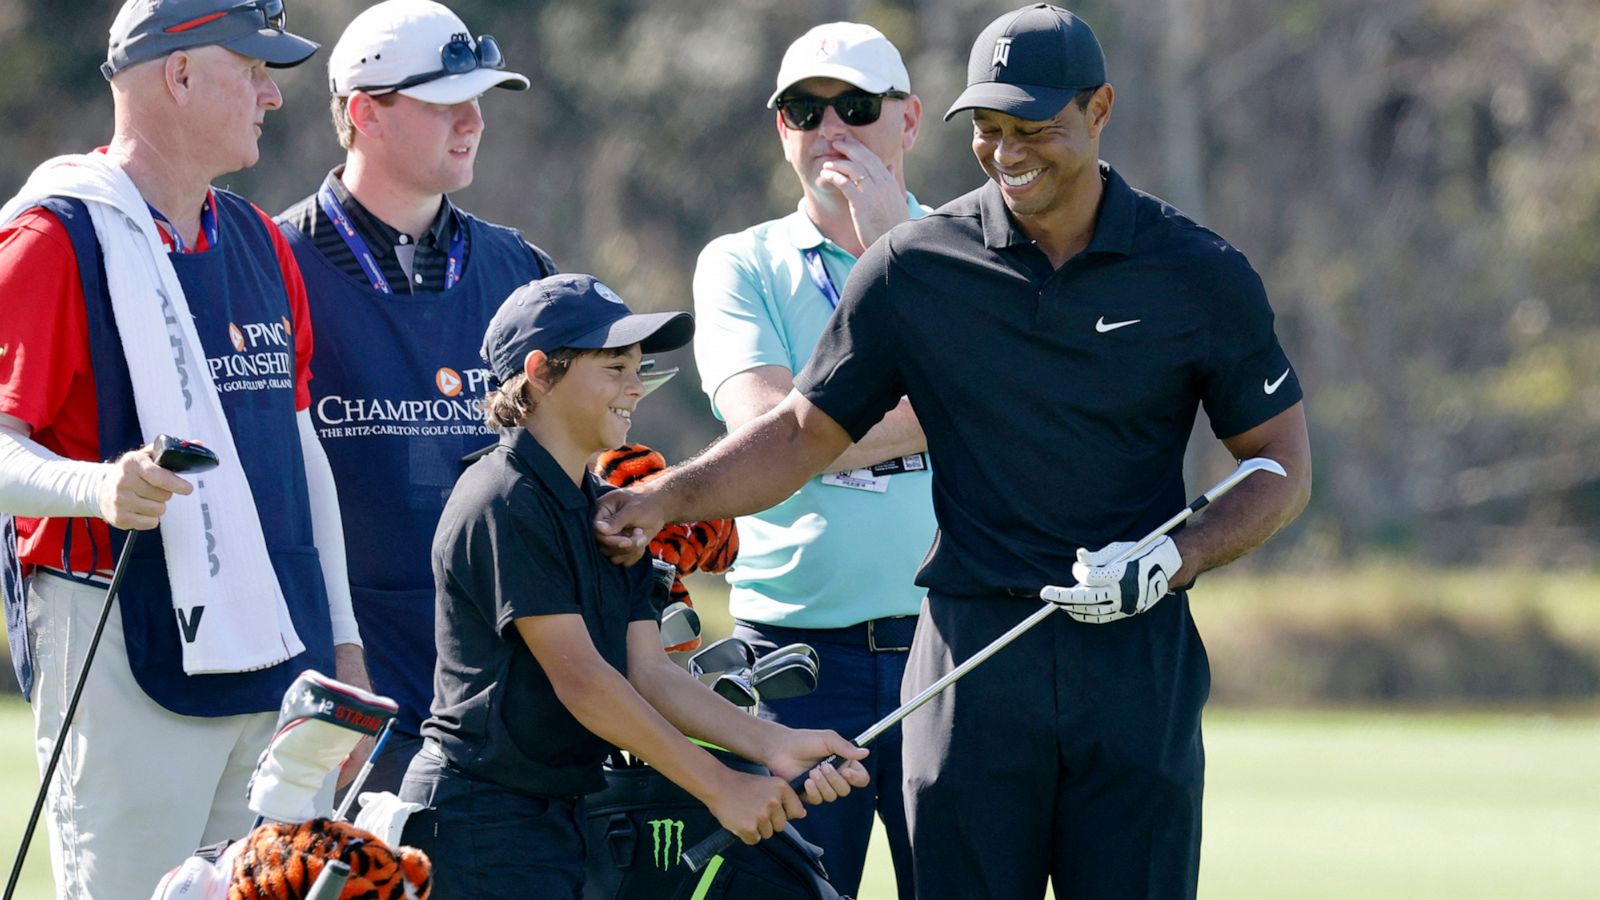 Tiger Woods returns to competitive golf alongside 12-year-old son Charlie